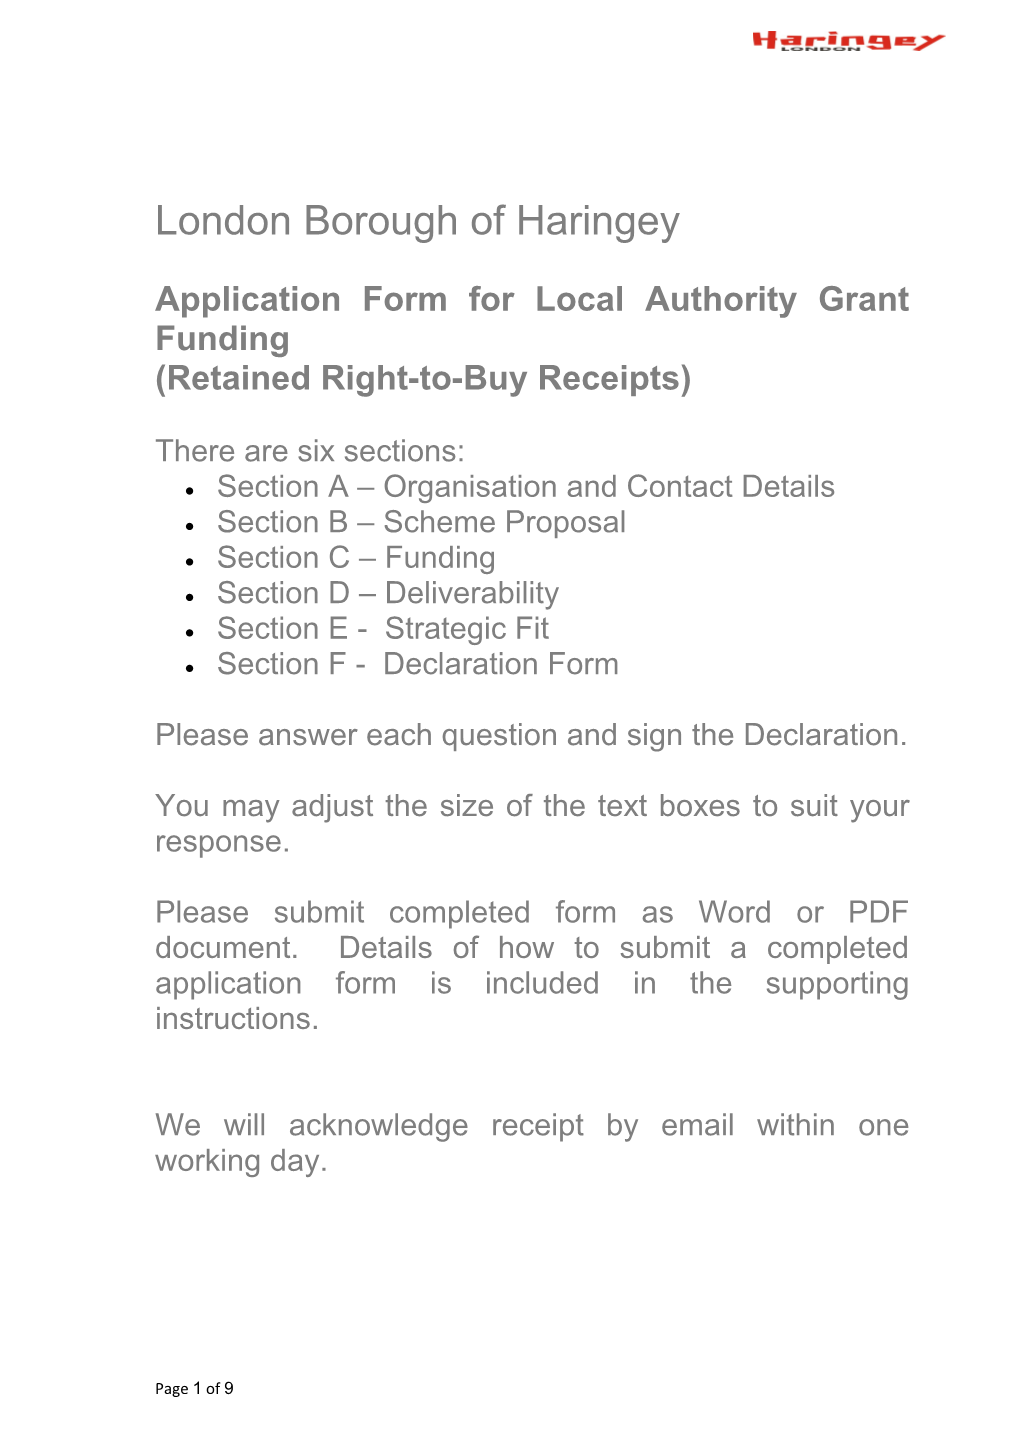 Application Formfor Local Authority Grant Funding